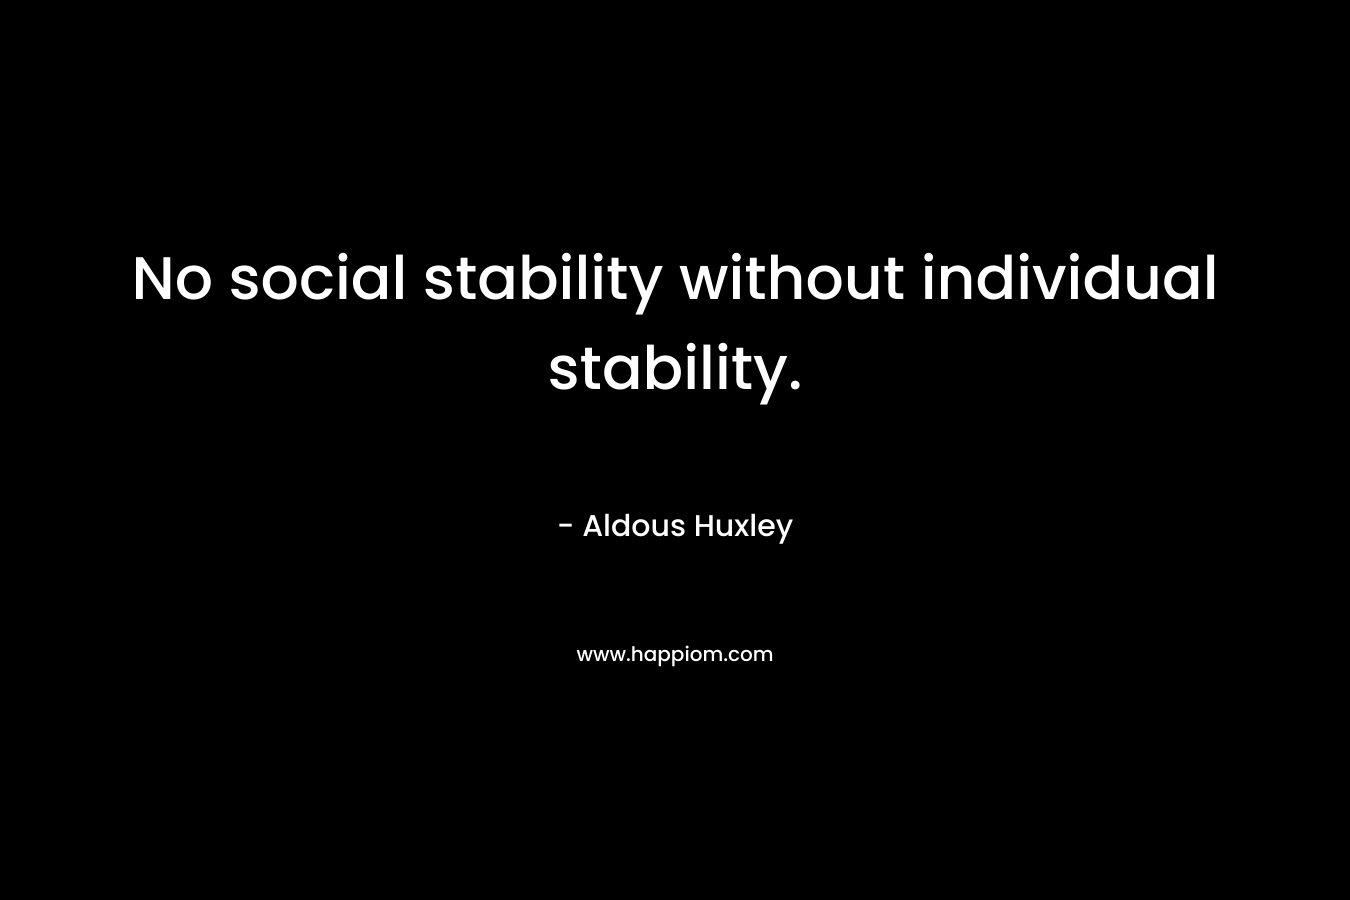 No social stability without individual stability. – Aldous Huxley